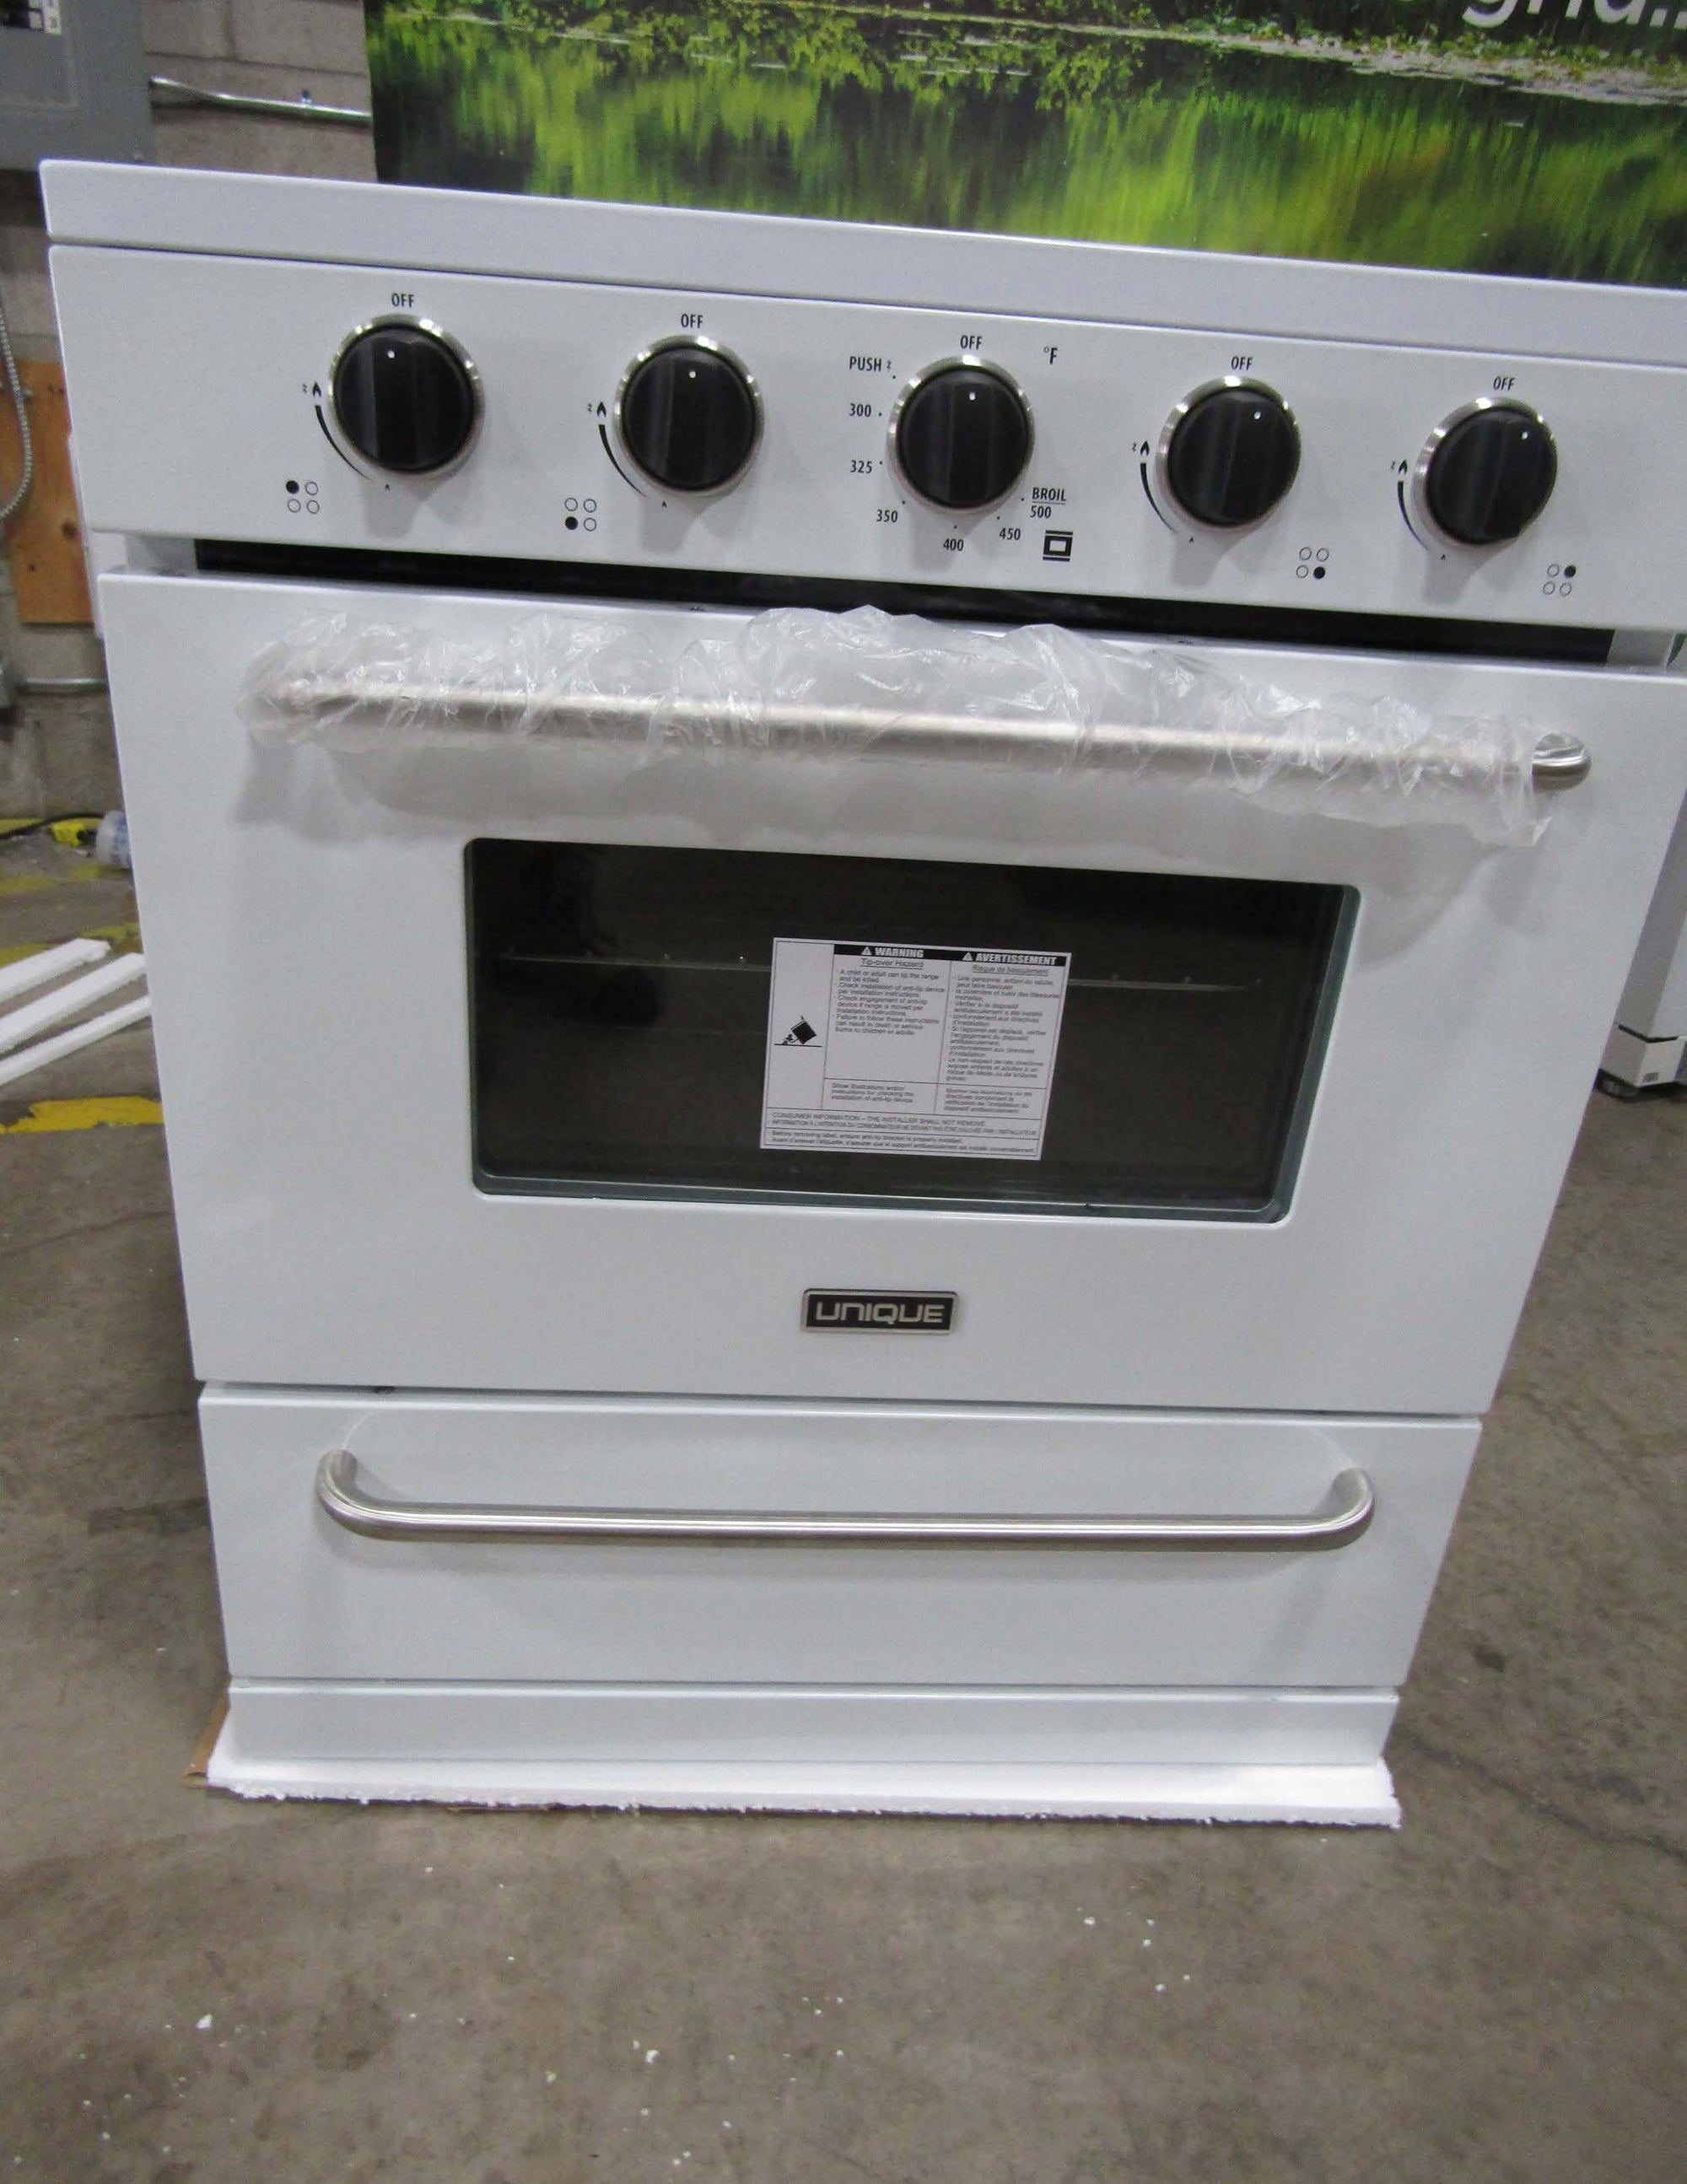 Unique Scratch and Dent or Pre-Owned Off-Grid Appliances New Scratch & Dent Unique Classic 30" Propane Range Battery Ignition Variable BTU Sealed Burners Cast Iron Grates With Window UGP-30G OF1 W (White) Serial #1017592 30% Off!